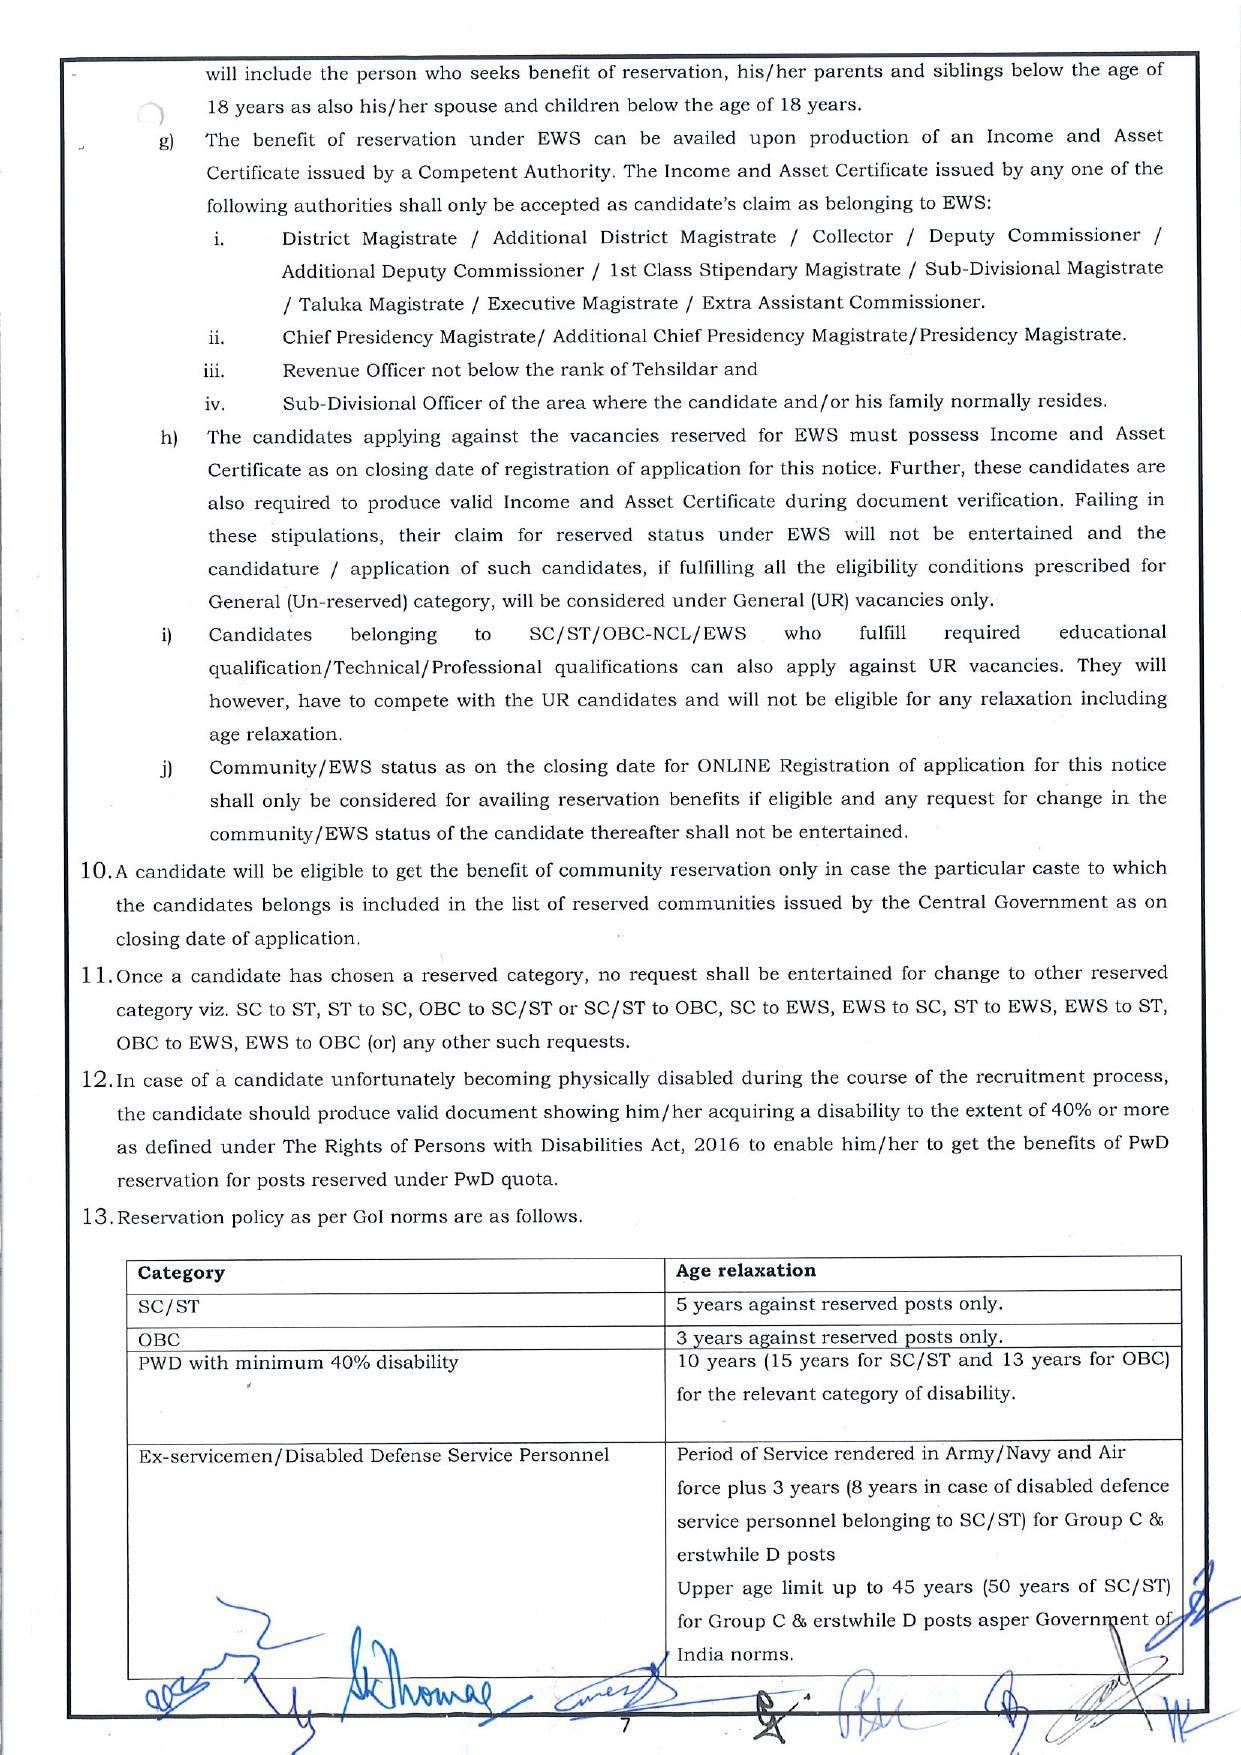 Forest Research Institute Dehradun (FRI Dehradun) Invites Application for 72 MTS, LDC and Various Posts - Page 15